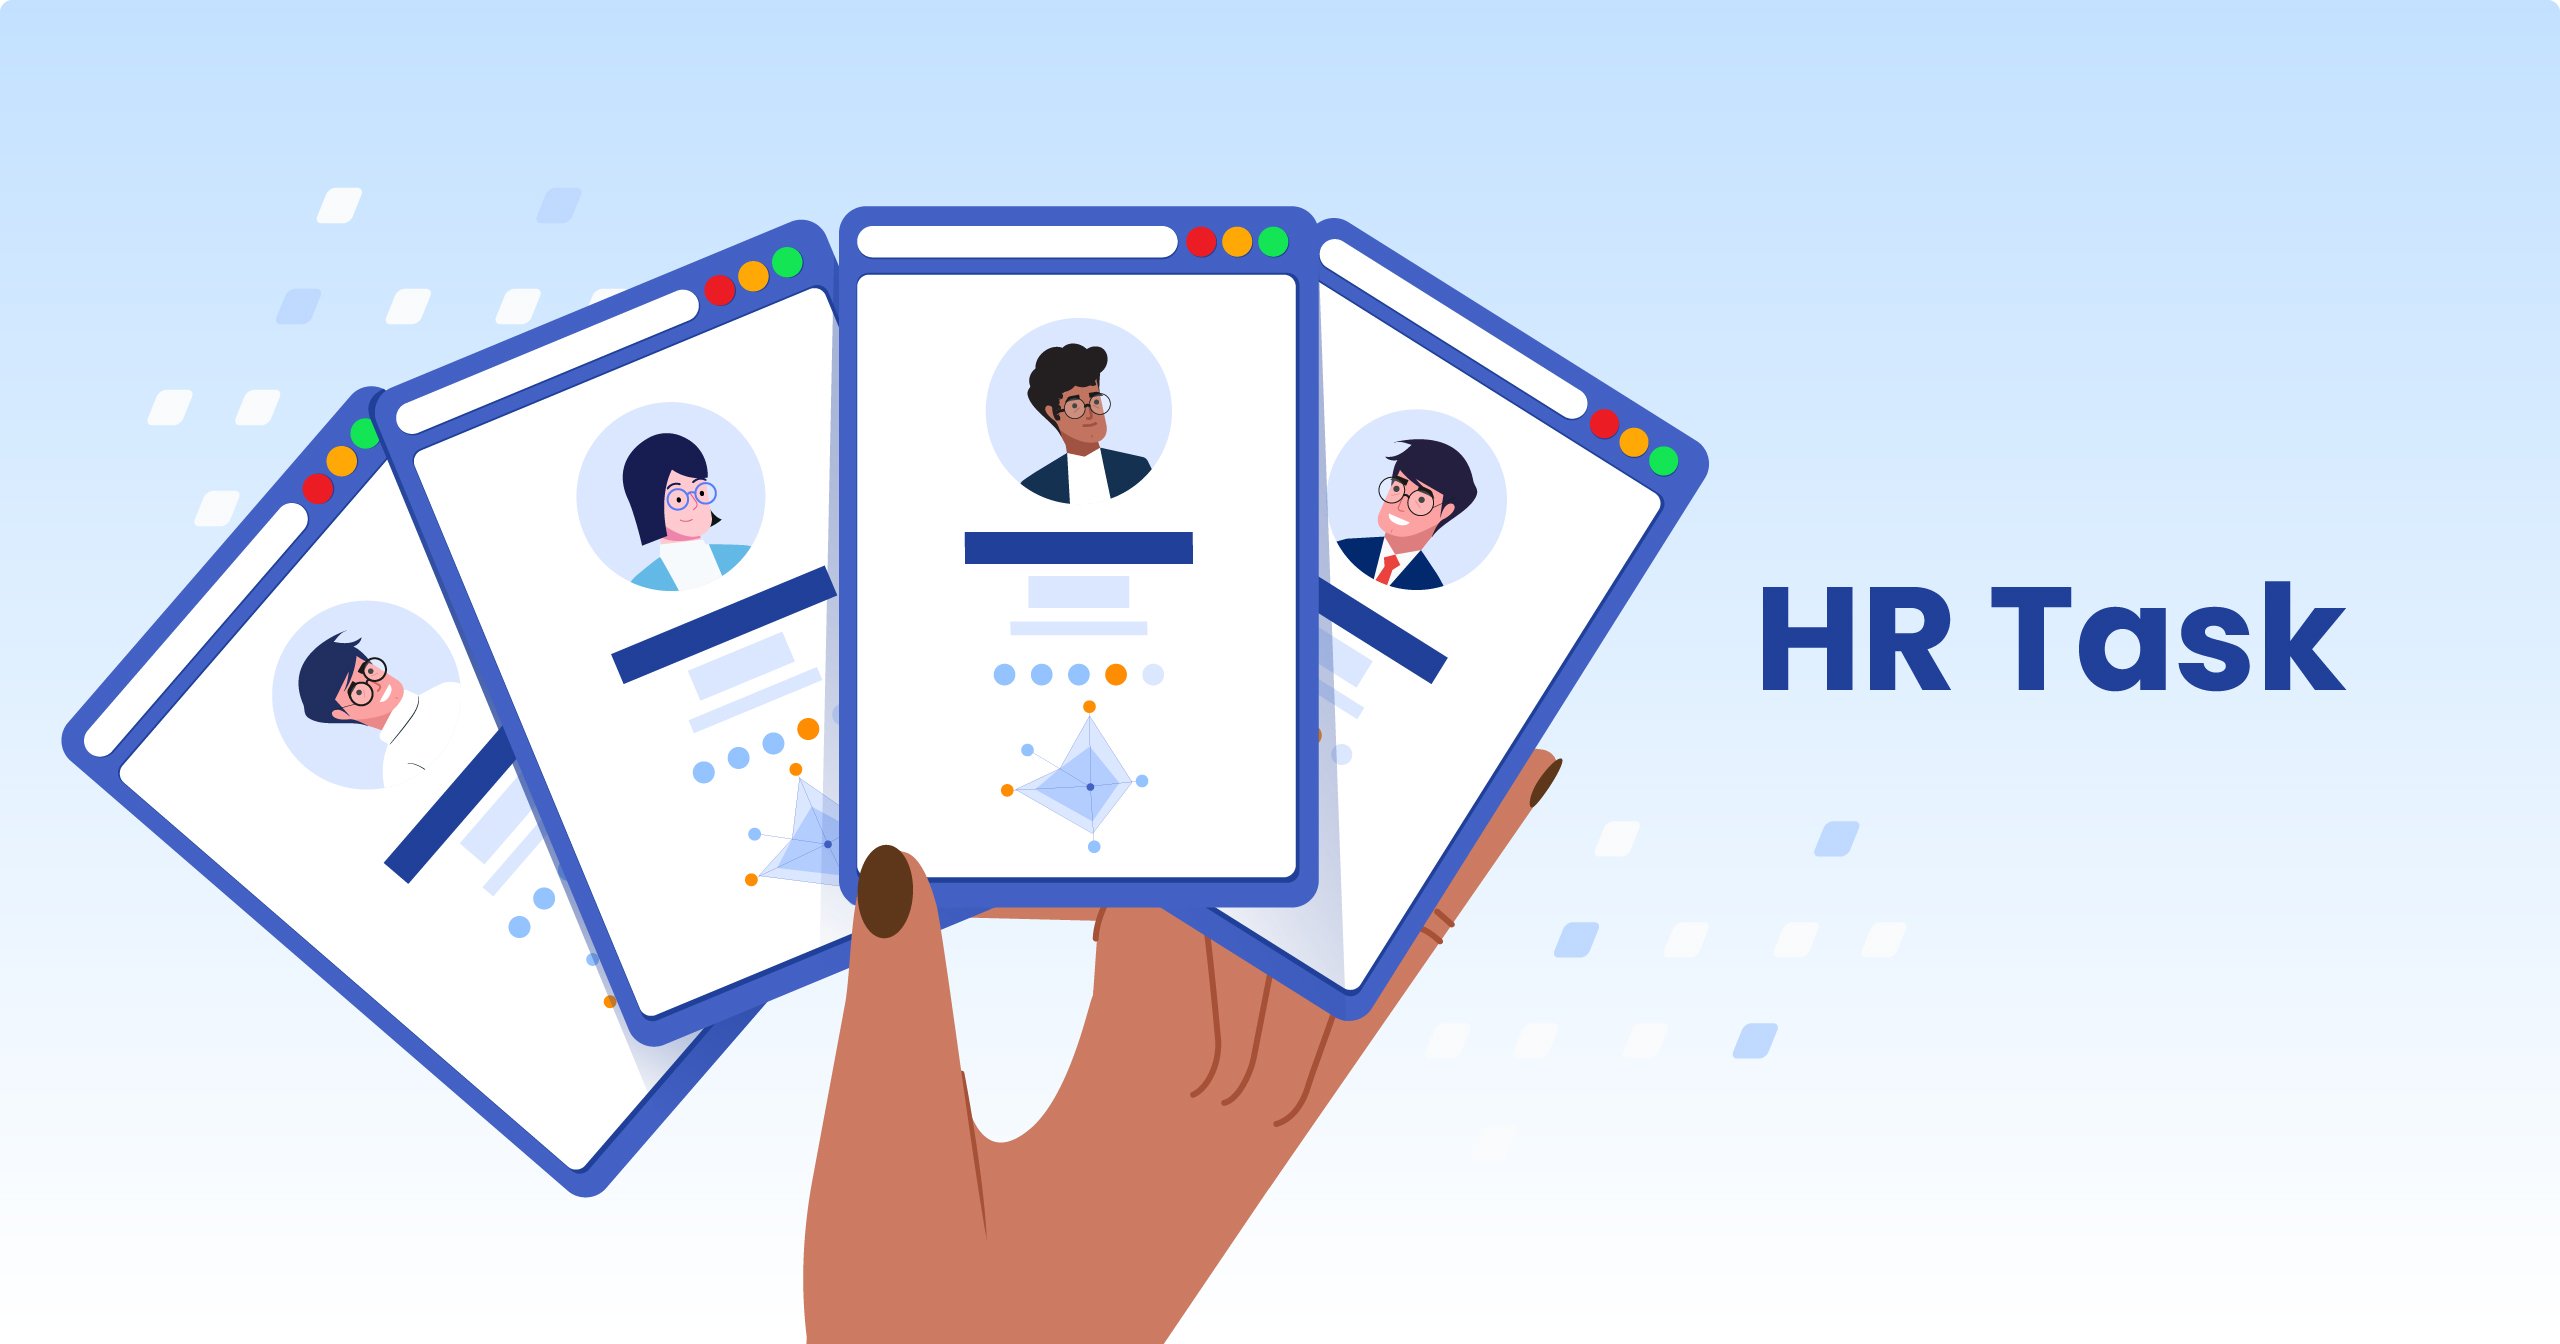 HR Tasks For Startup - Streamline HR Process To Save Time And Improve Productivity